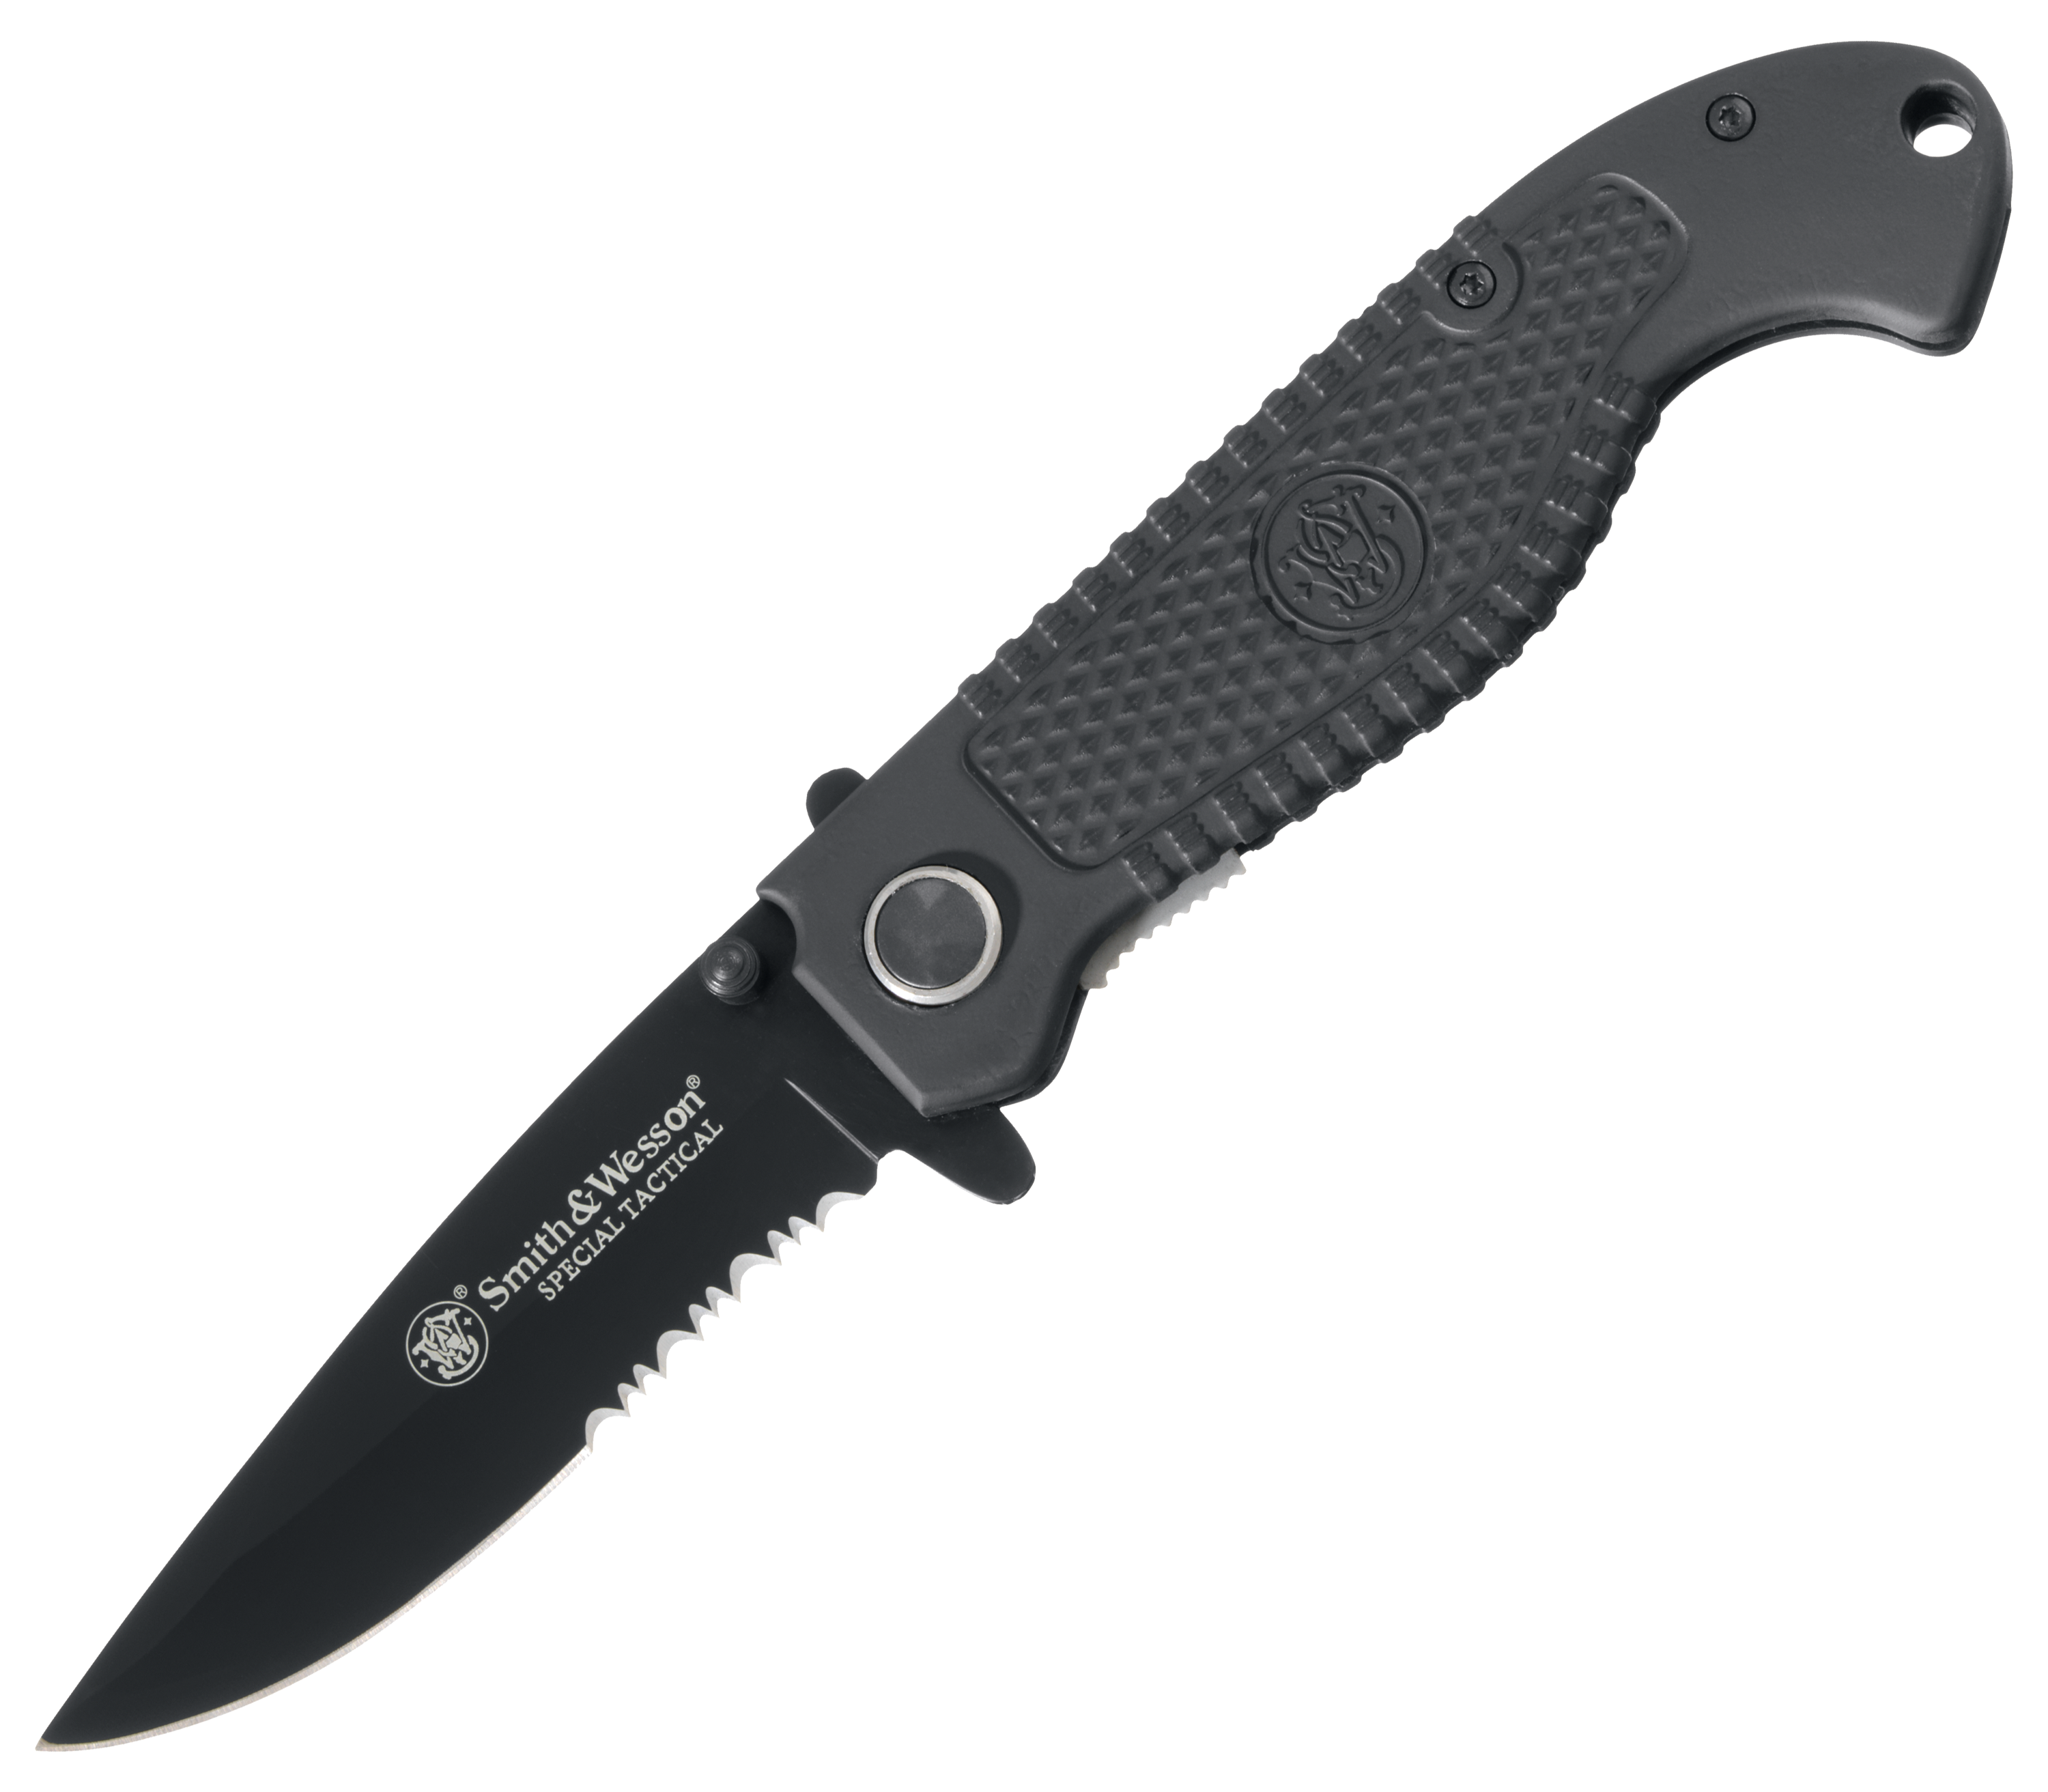 Smith &Wesson Special Tactical Folder Drop Point Folding Blade Tactical Knife